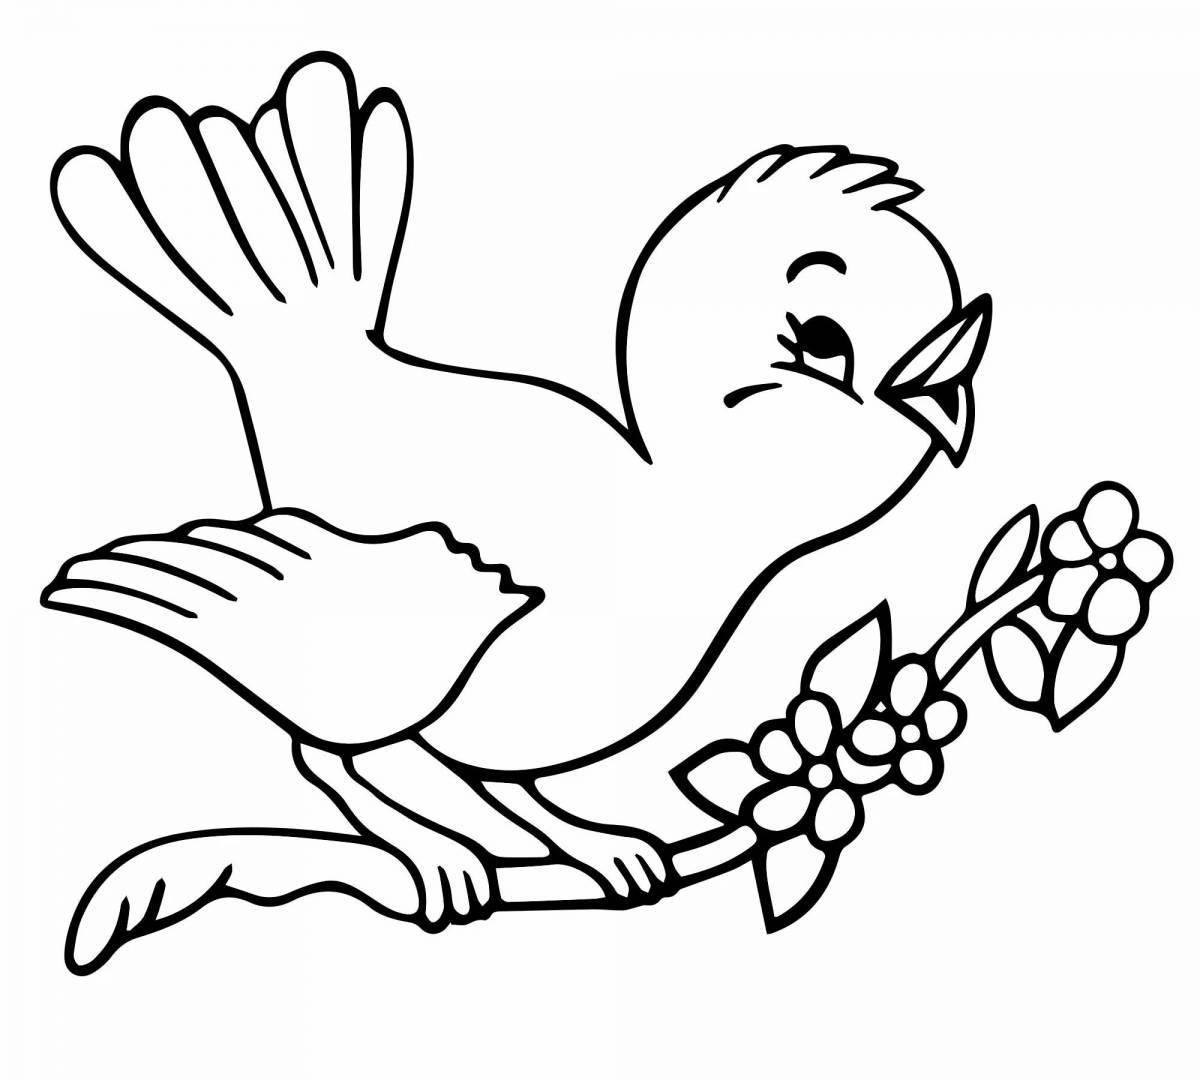 Dazzling sparrow coloring book for kids